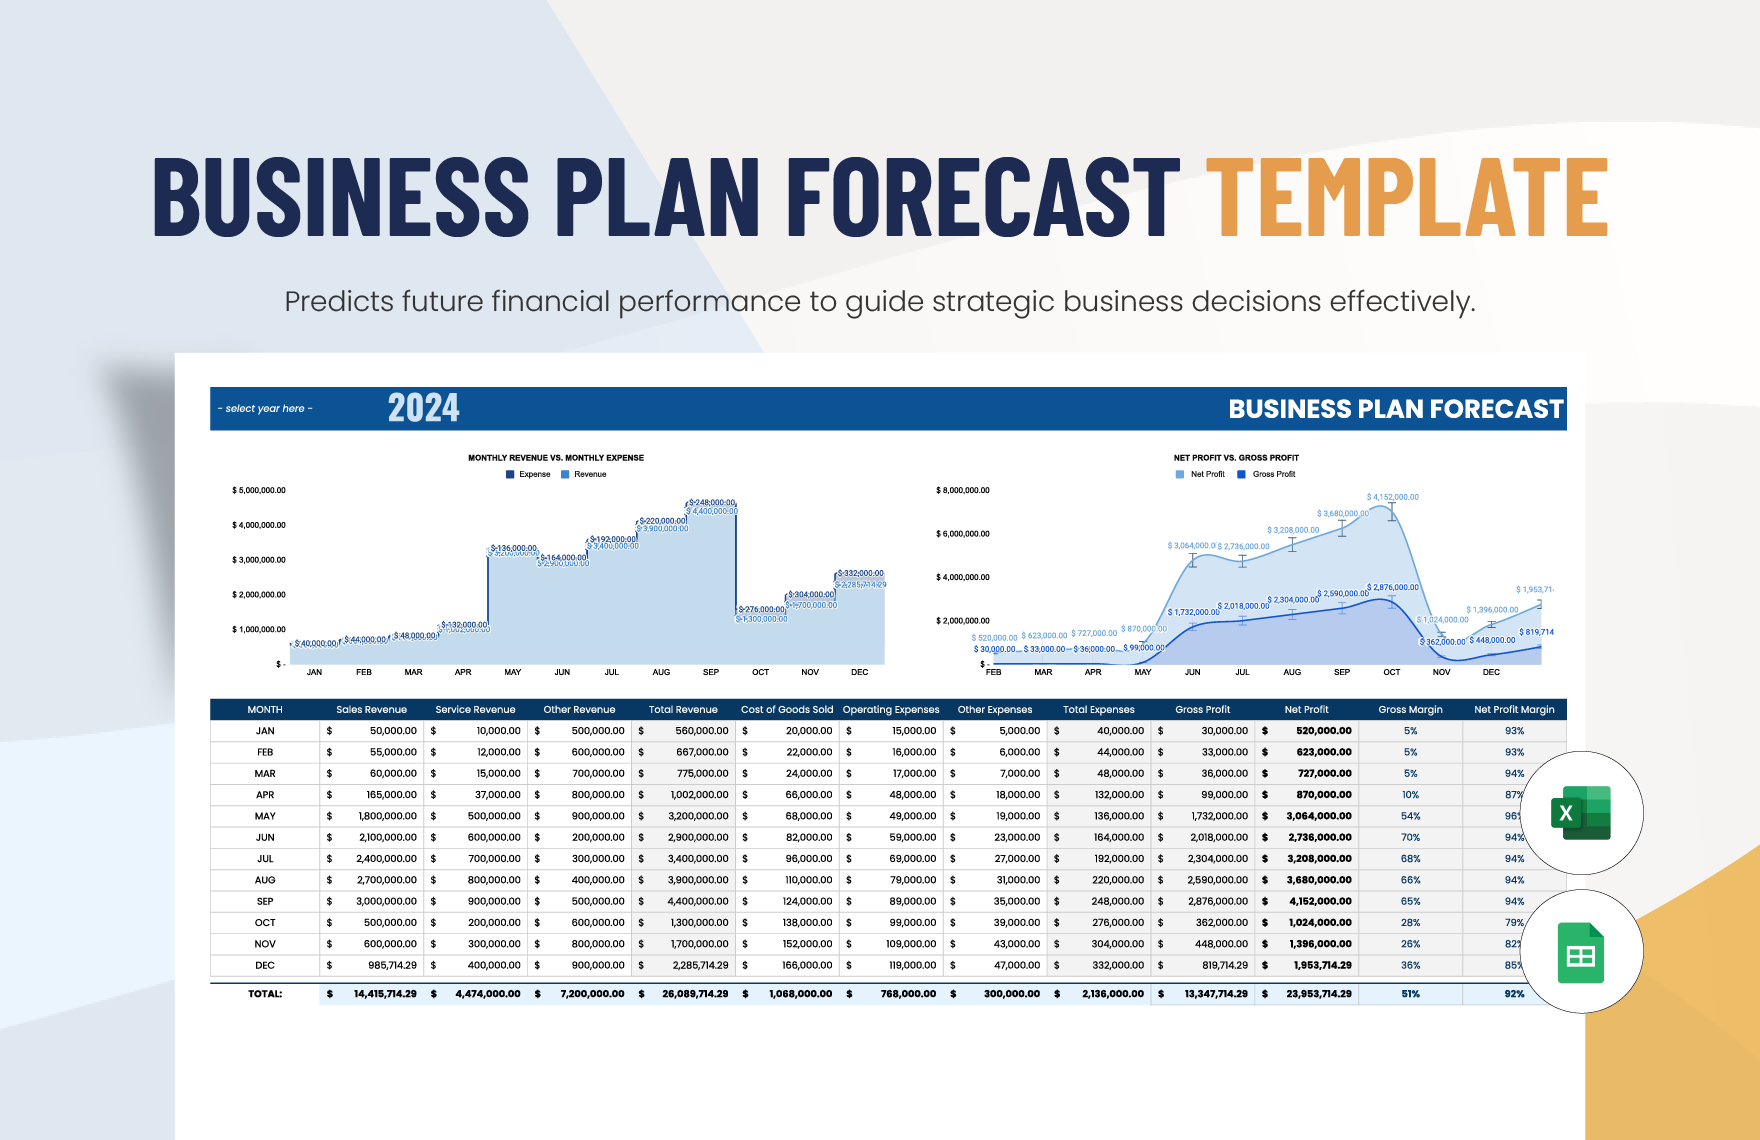 Business Plan Forecast Template in Excel, Google Sheets